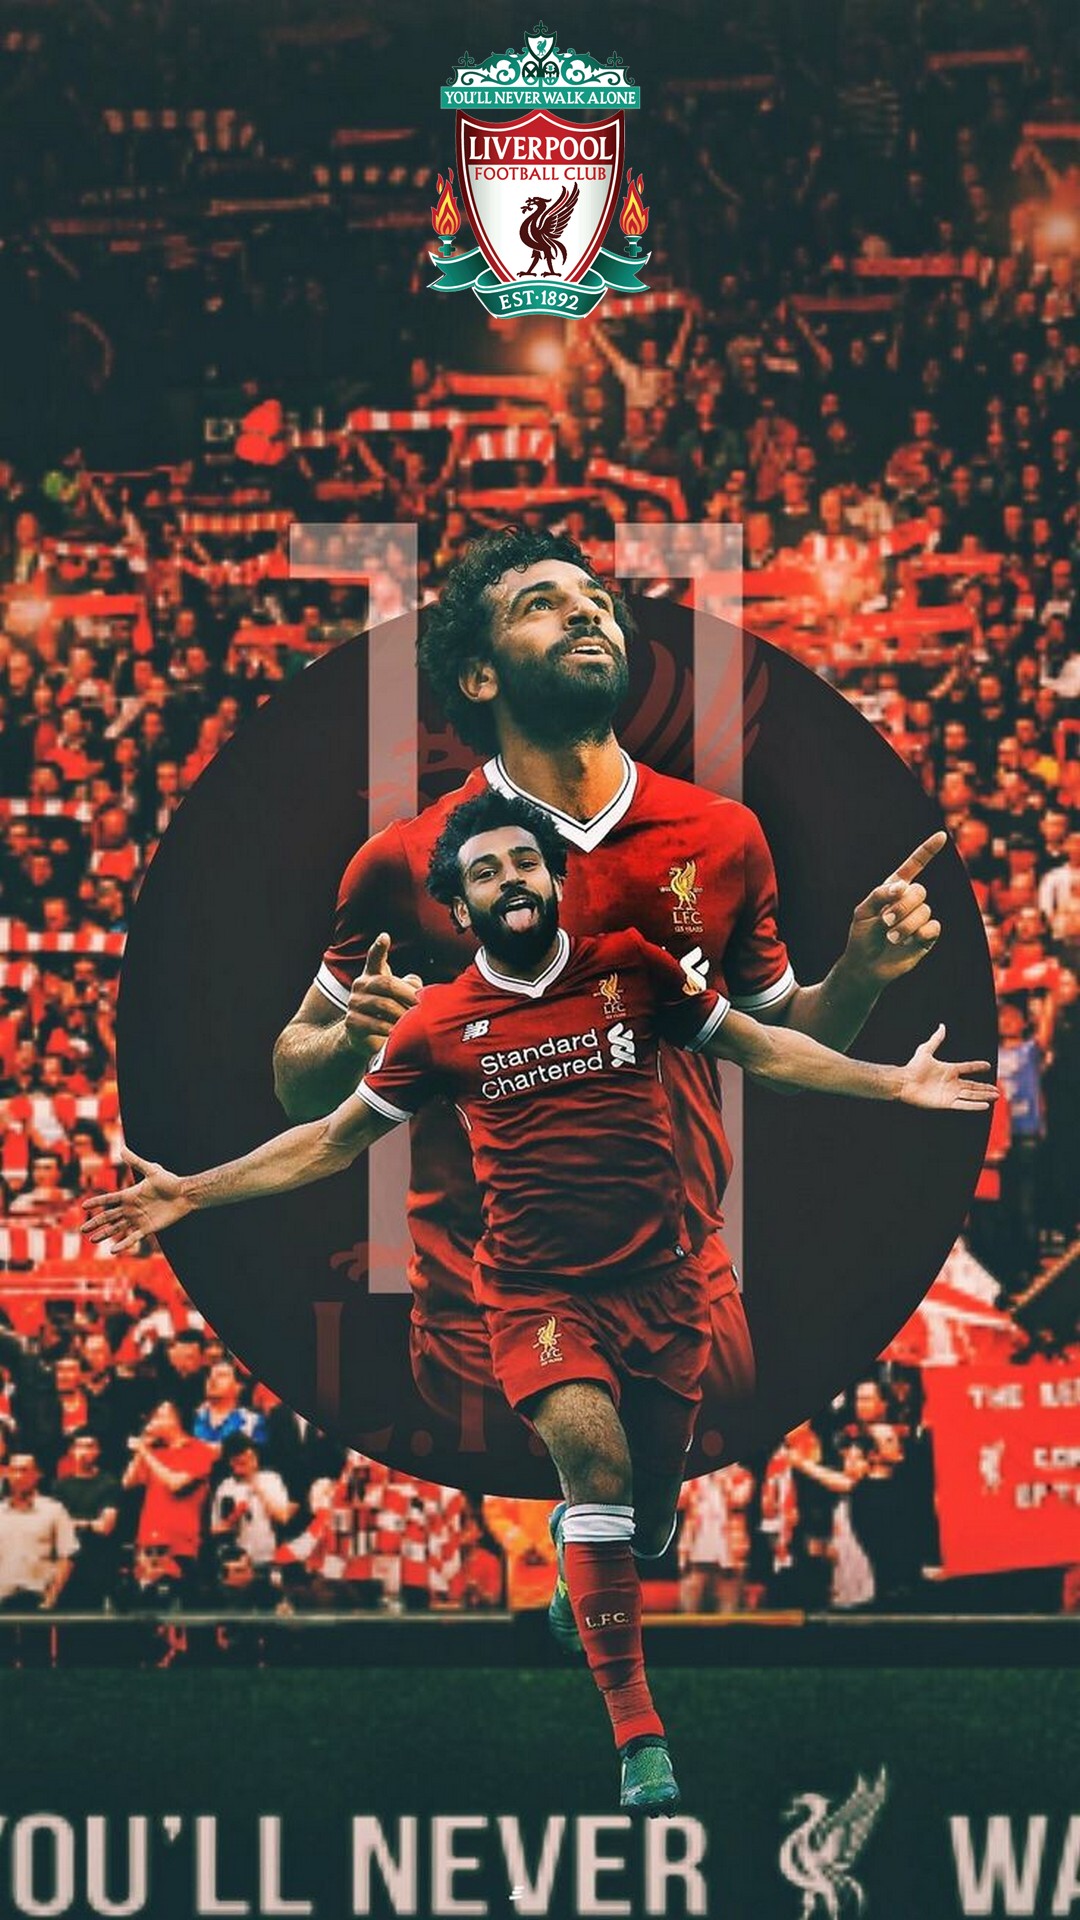 Liverpool Mohamed Salah Wallpaper Android with image resolution 1080x1920 pixel. You can make this wallpaper for your Android backgrounds, Tablet, Smartphones Screensavers and Mobile Phone Lock Screen